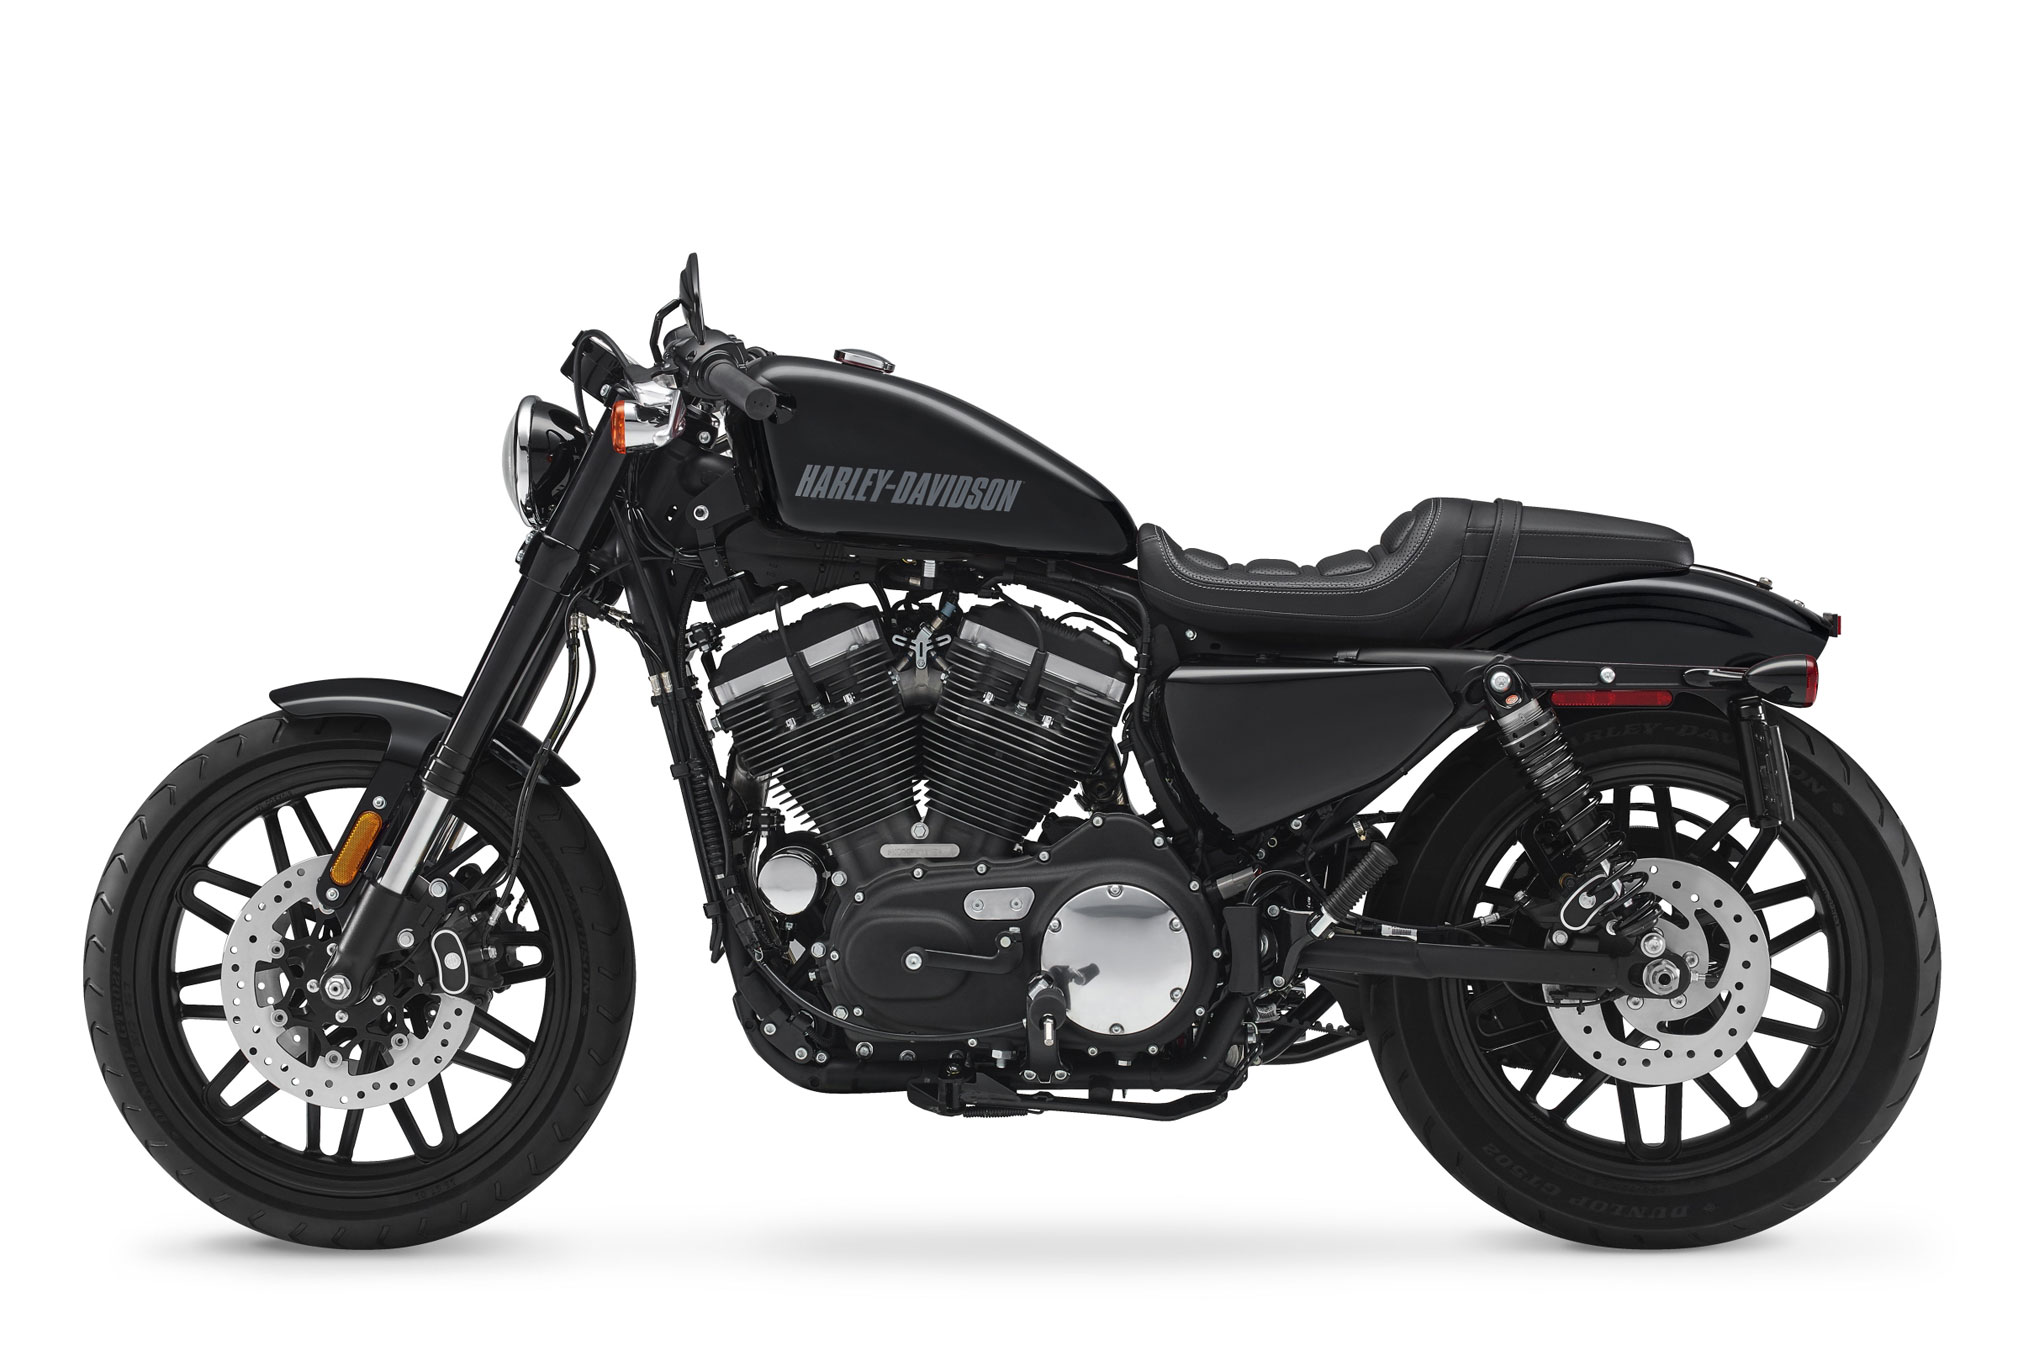 2019 Harley Davidson Roadster Review Total Motorcycle